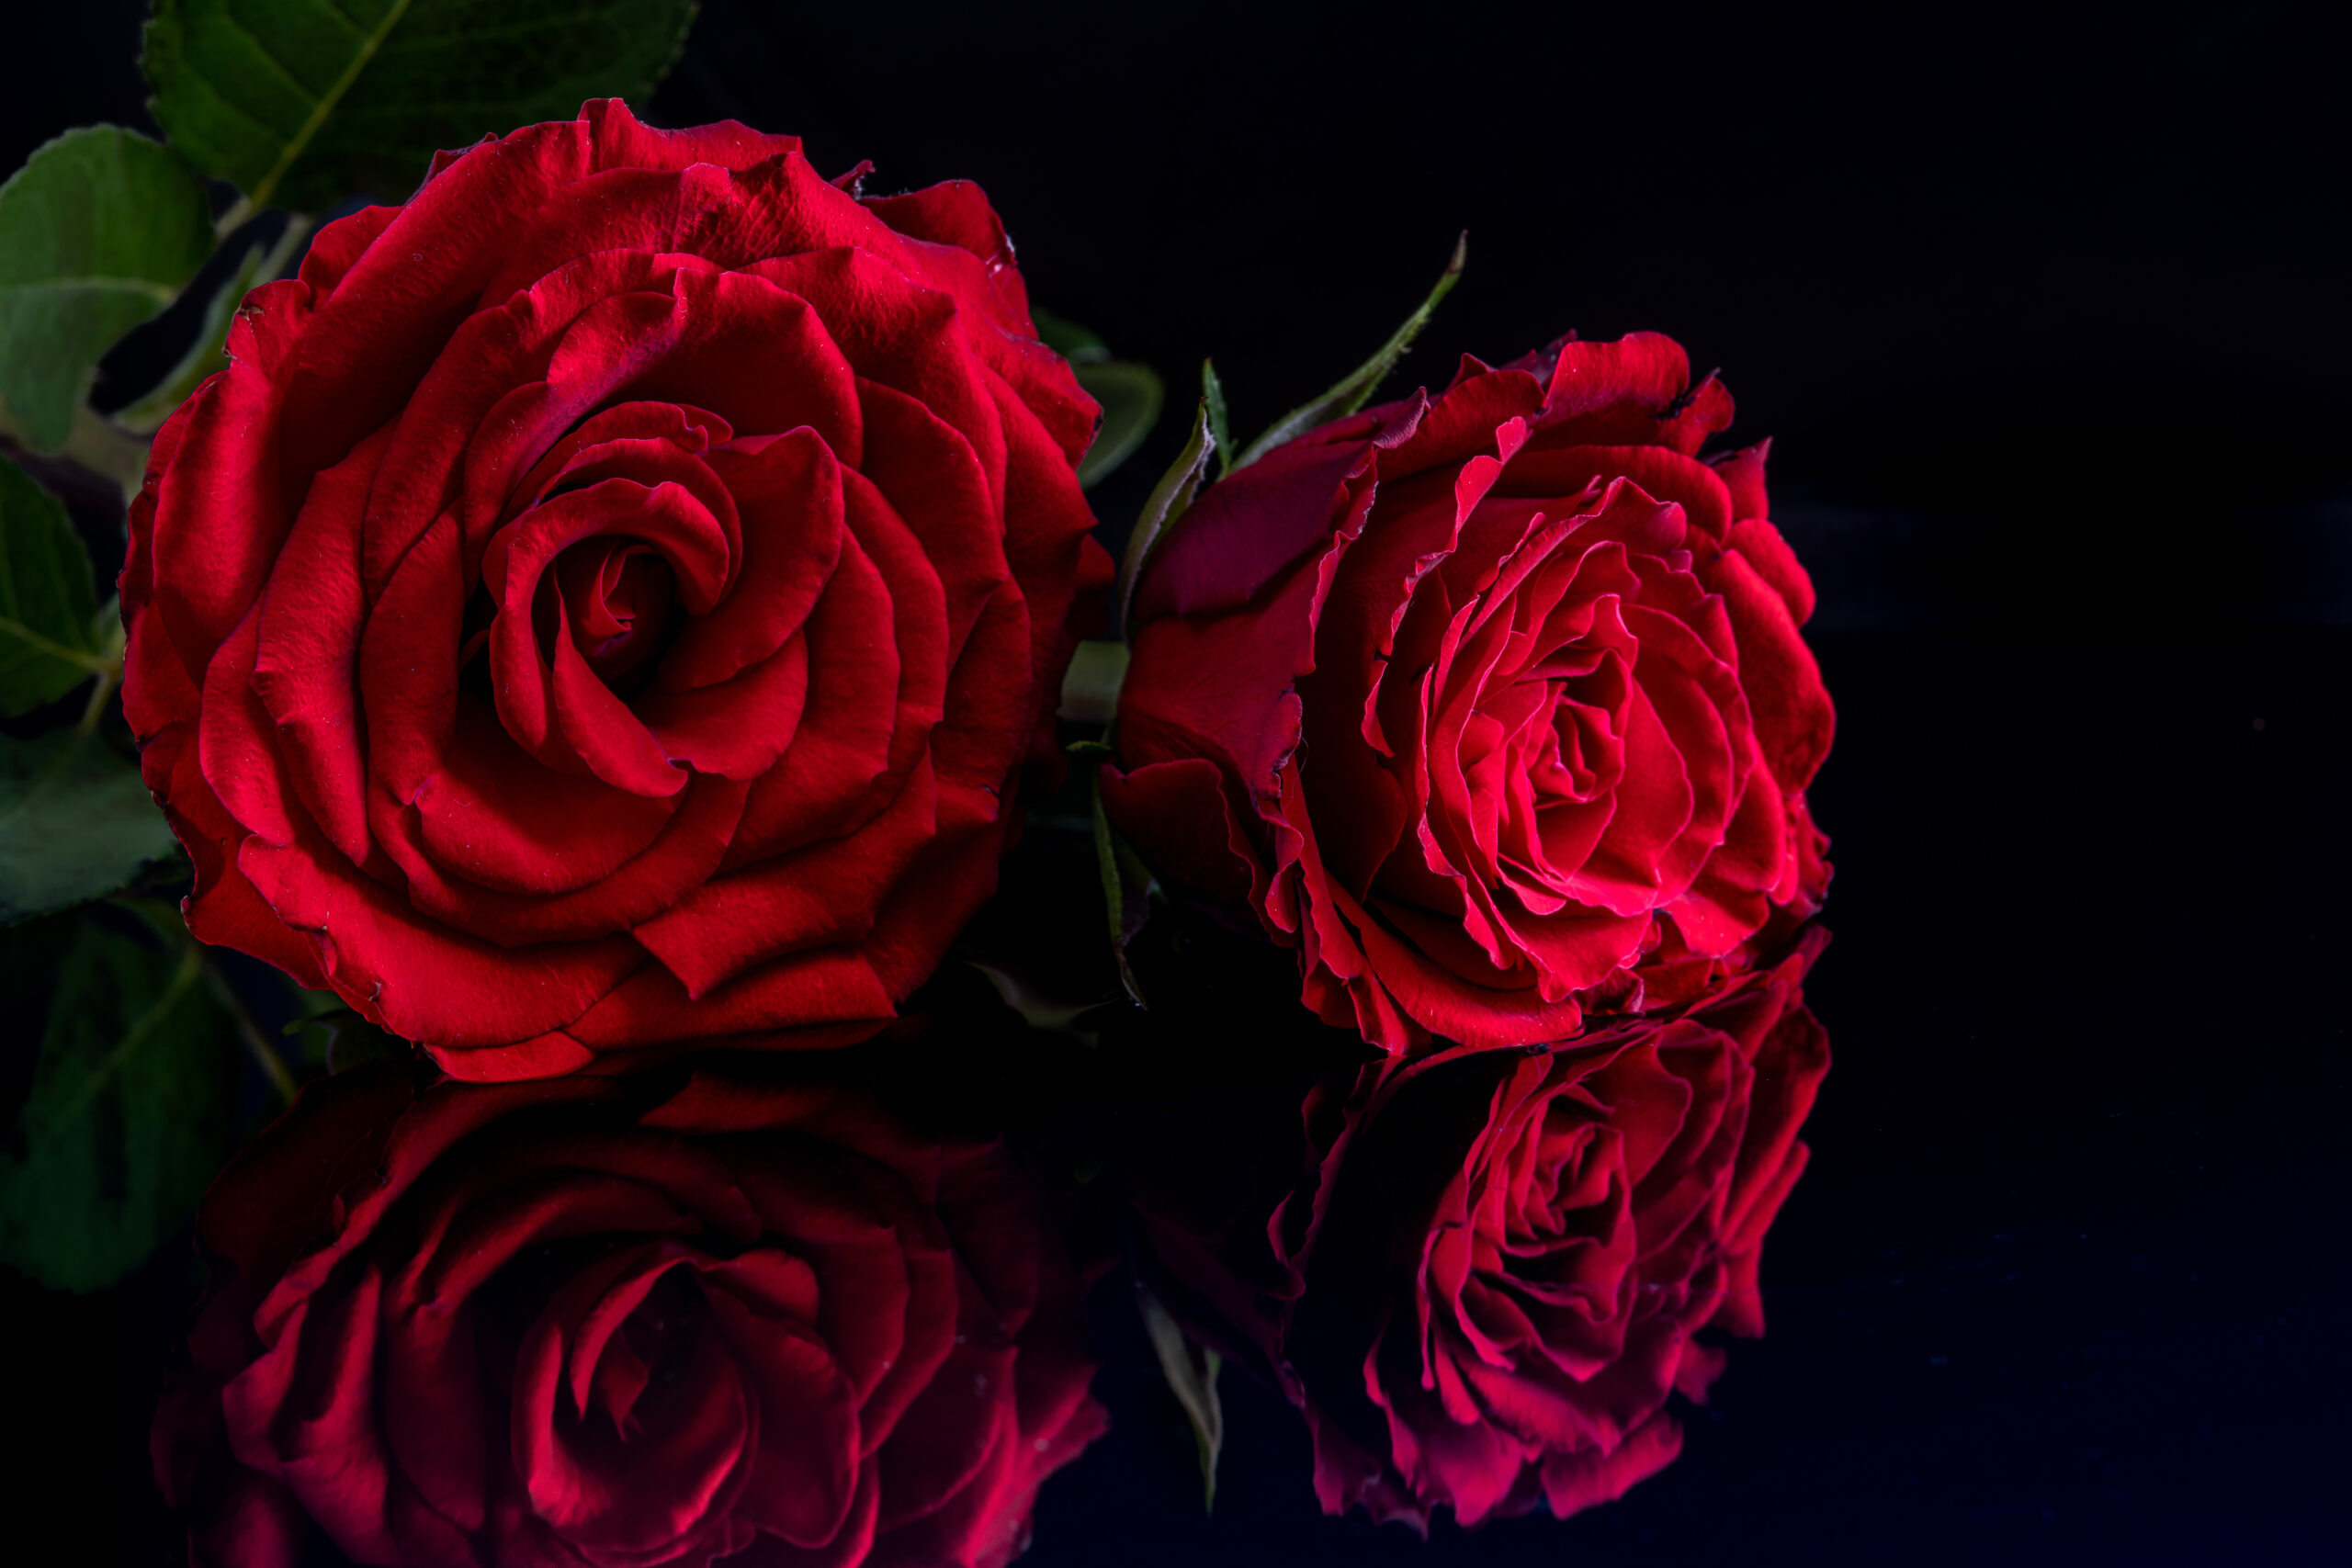 Reflection of red roses